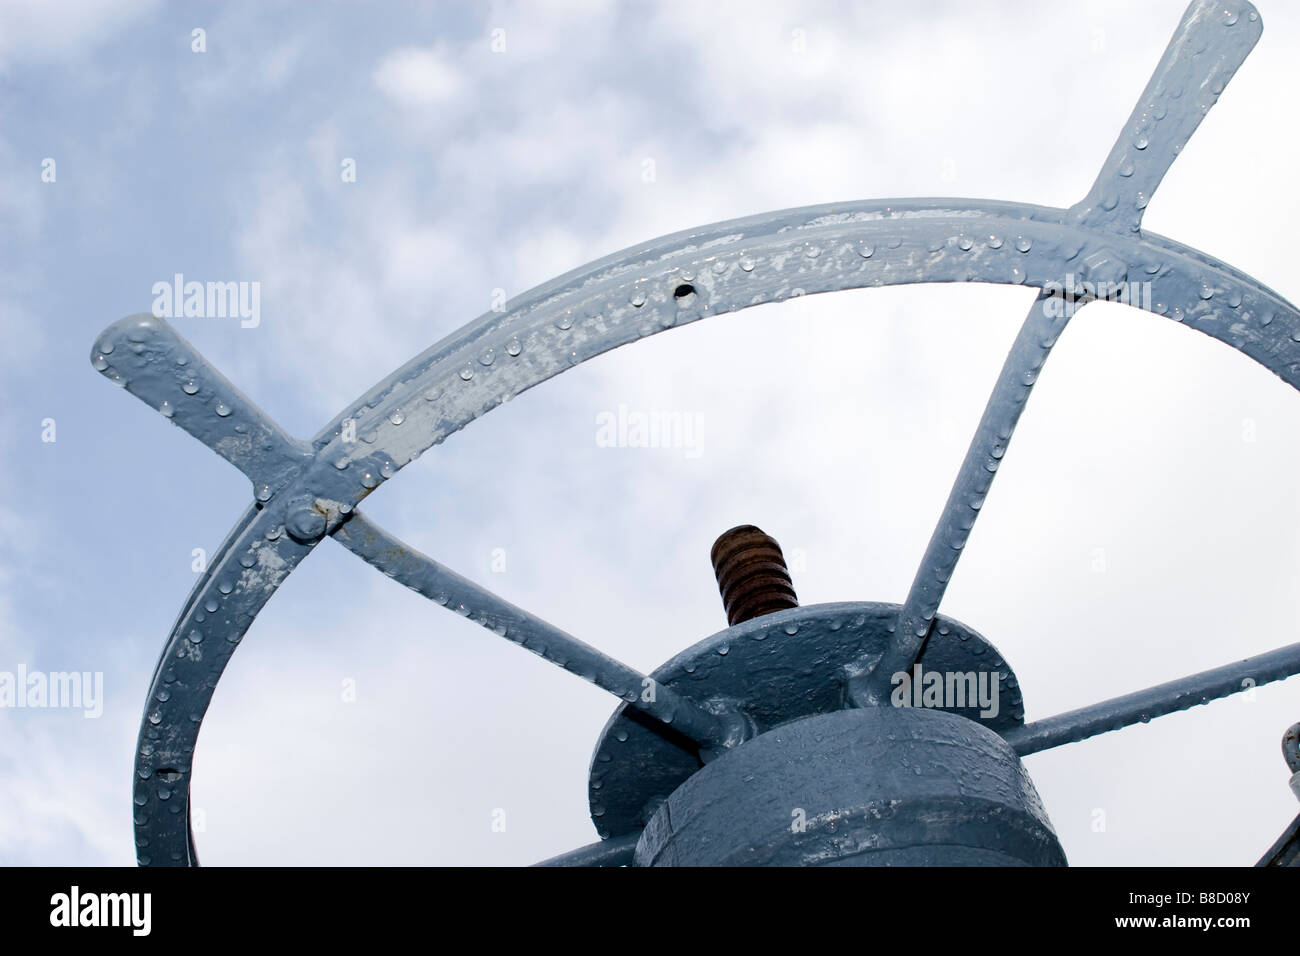 Wheel of the hand operated sluice over blue sky with clouds. Stock Photo